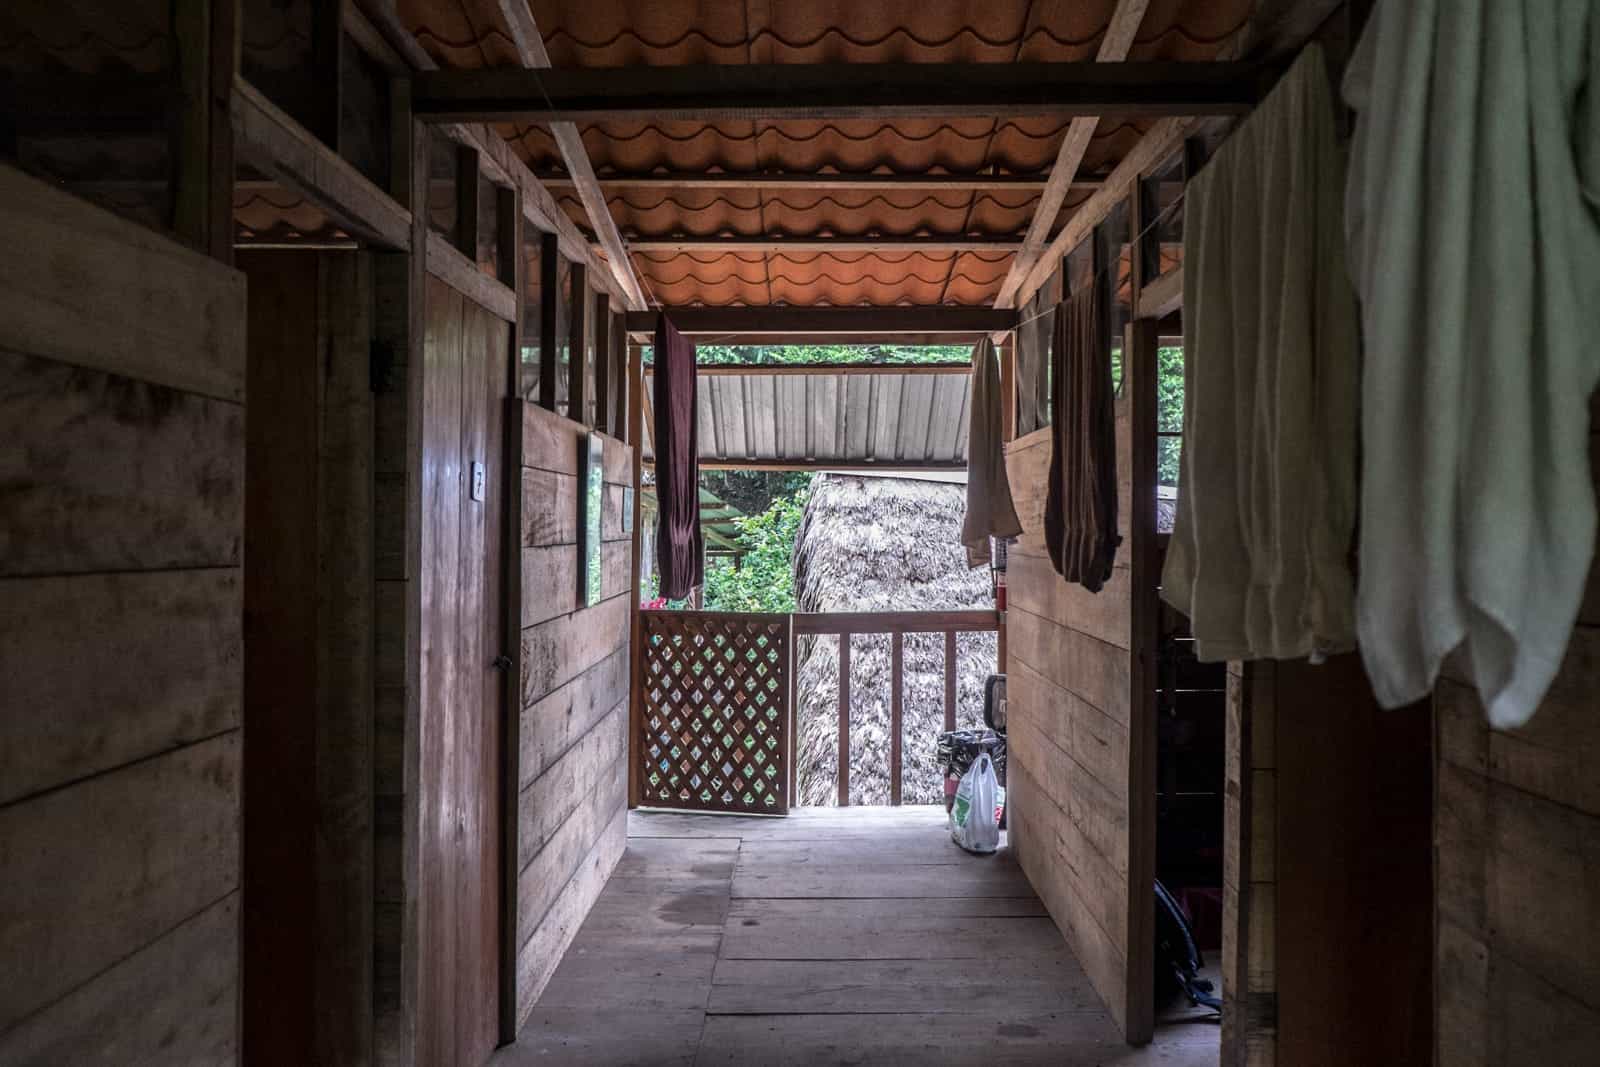 The hallway of a wooden hut with open bedroom doors - a typical lodge in the Ecuador Amazon. 